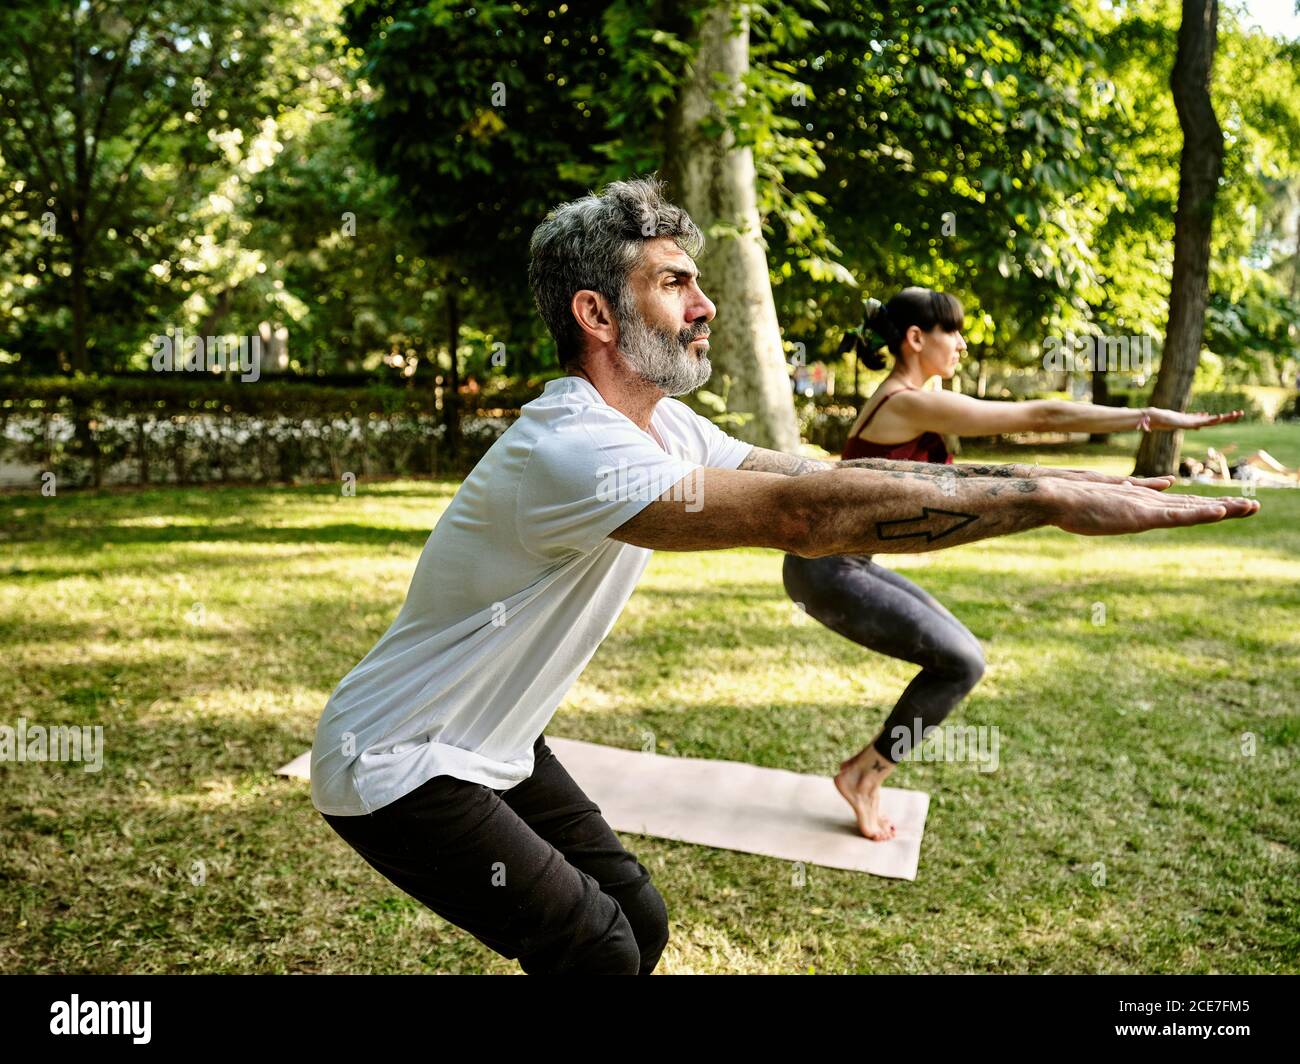 Side view of concentrated couple in sportswear balancing barefoot on mats in Utkatasana while practicing yoga in green garden Stock Photo